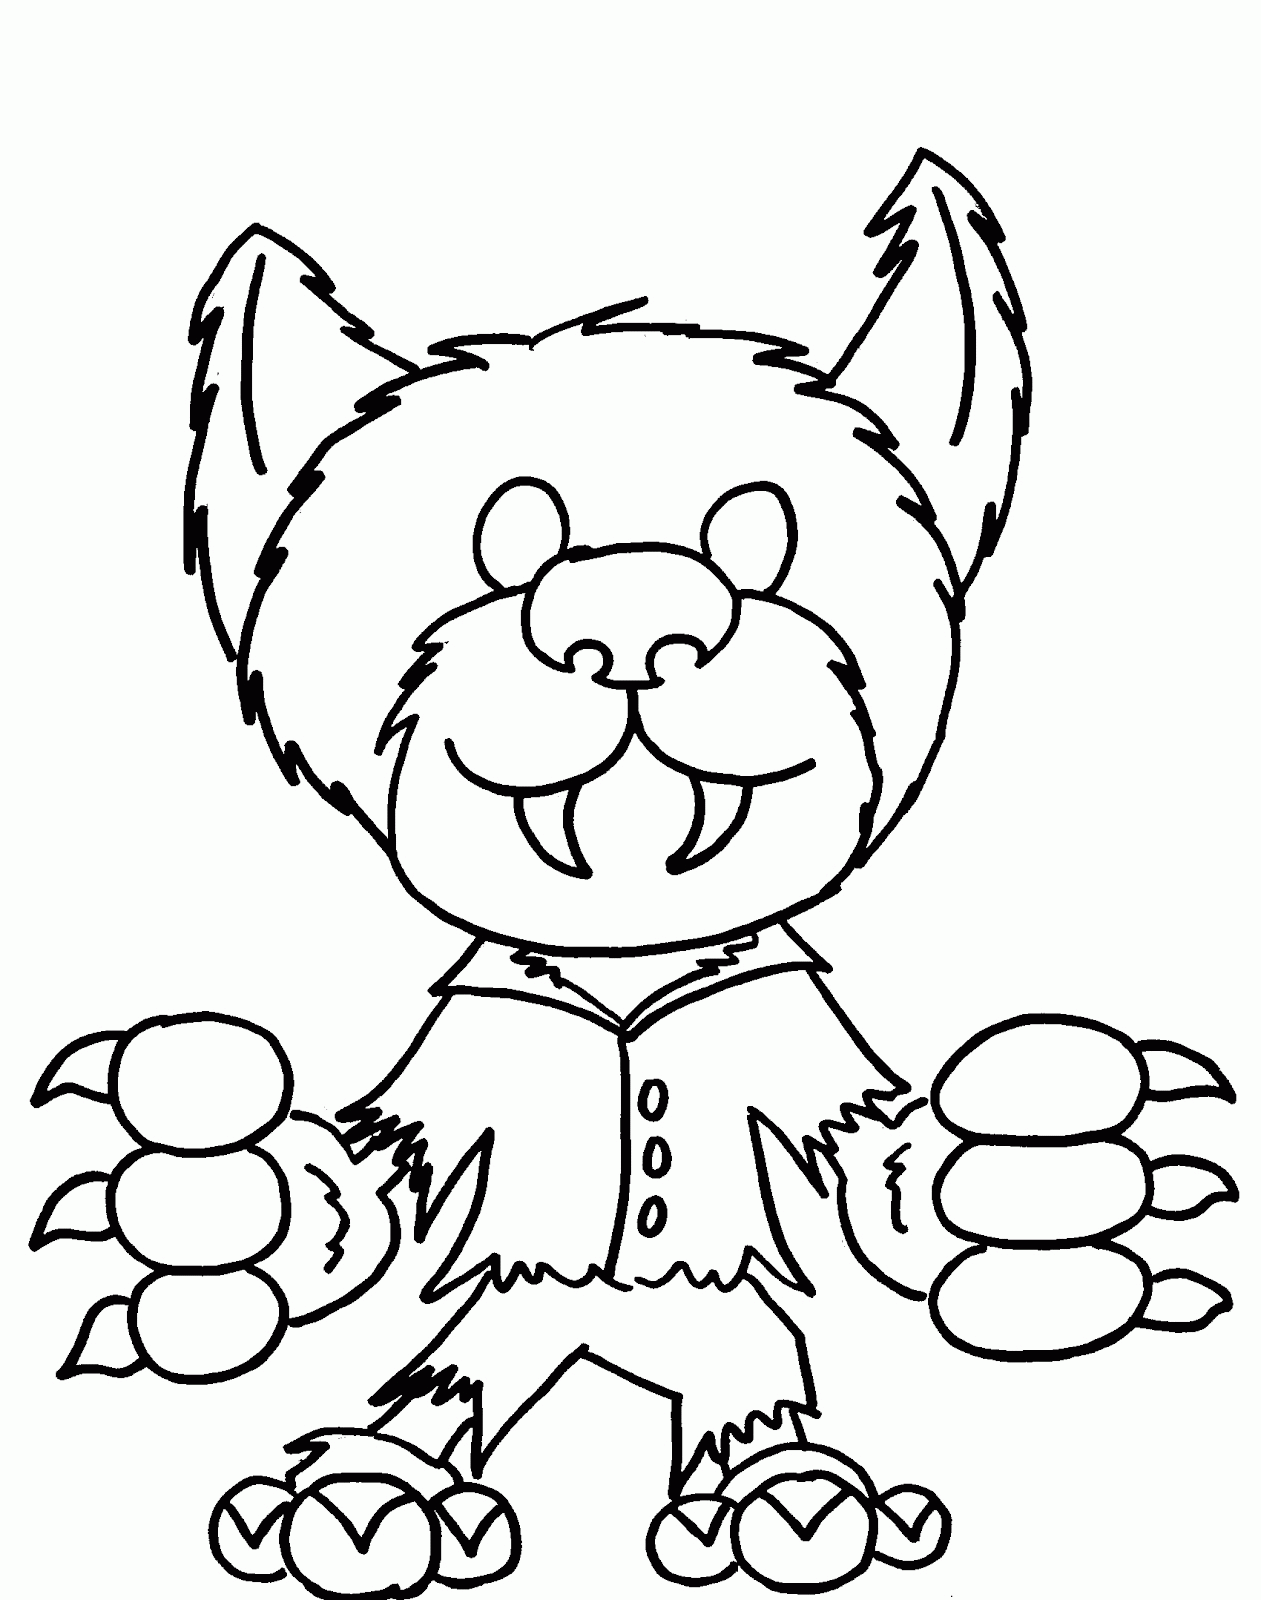 All Halloween Monsters Coloring Pages - Coloring Pages For All Ages